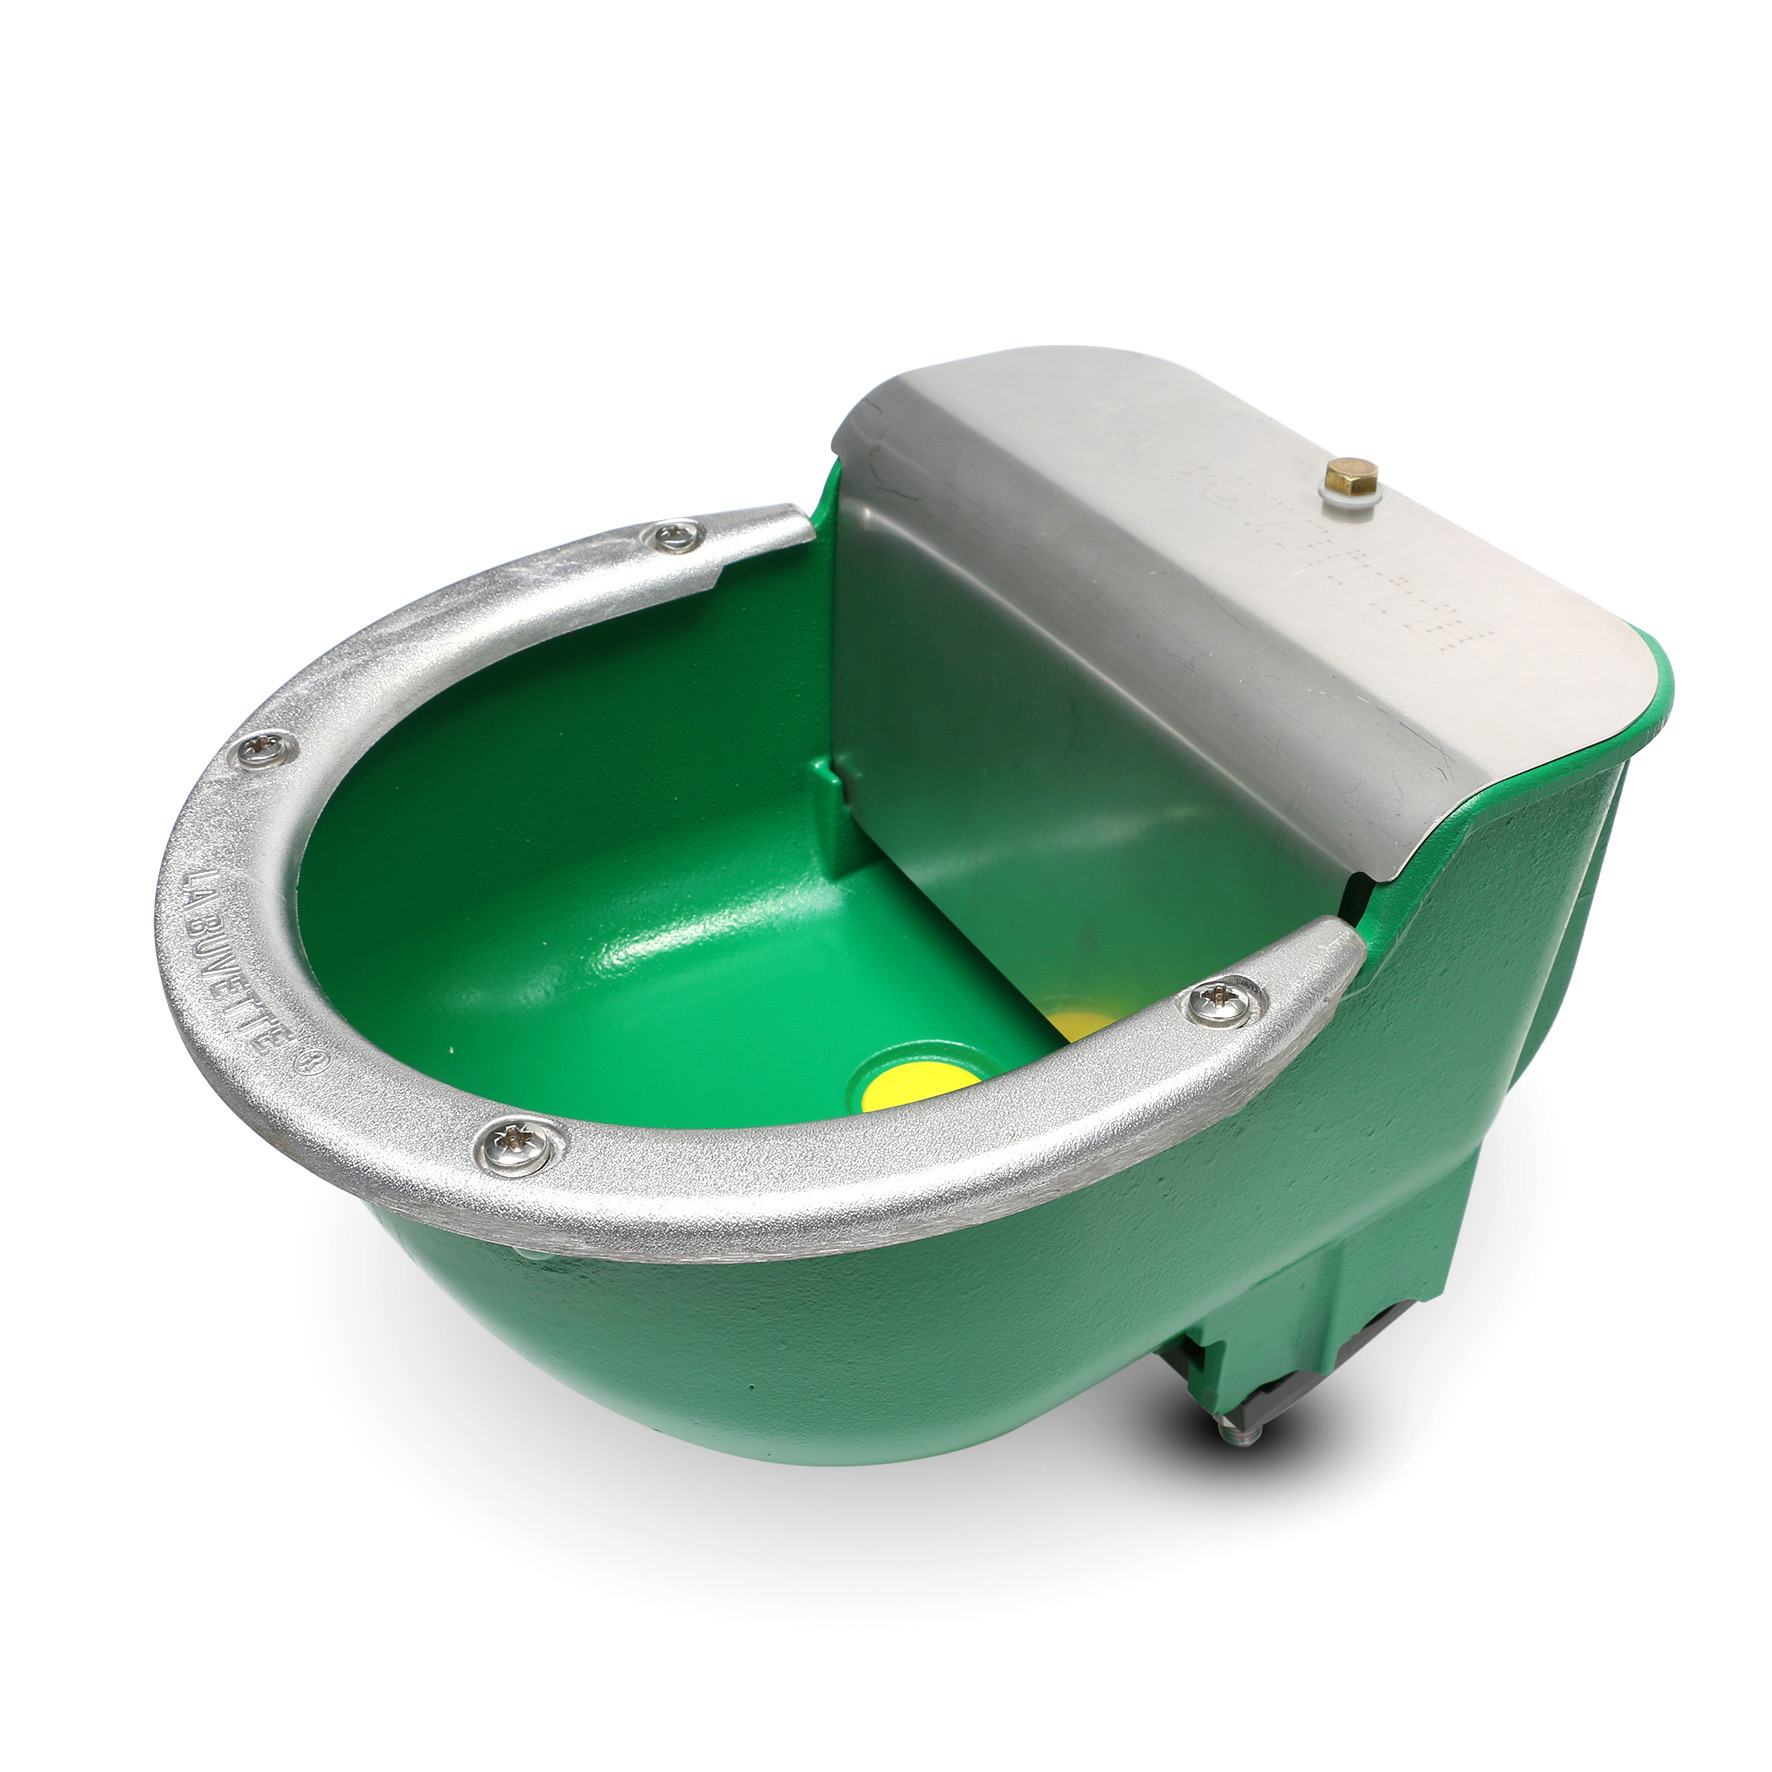 LAC 5A - NON-SPILL drinking bowl with constant water level